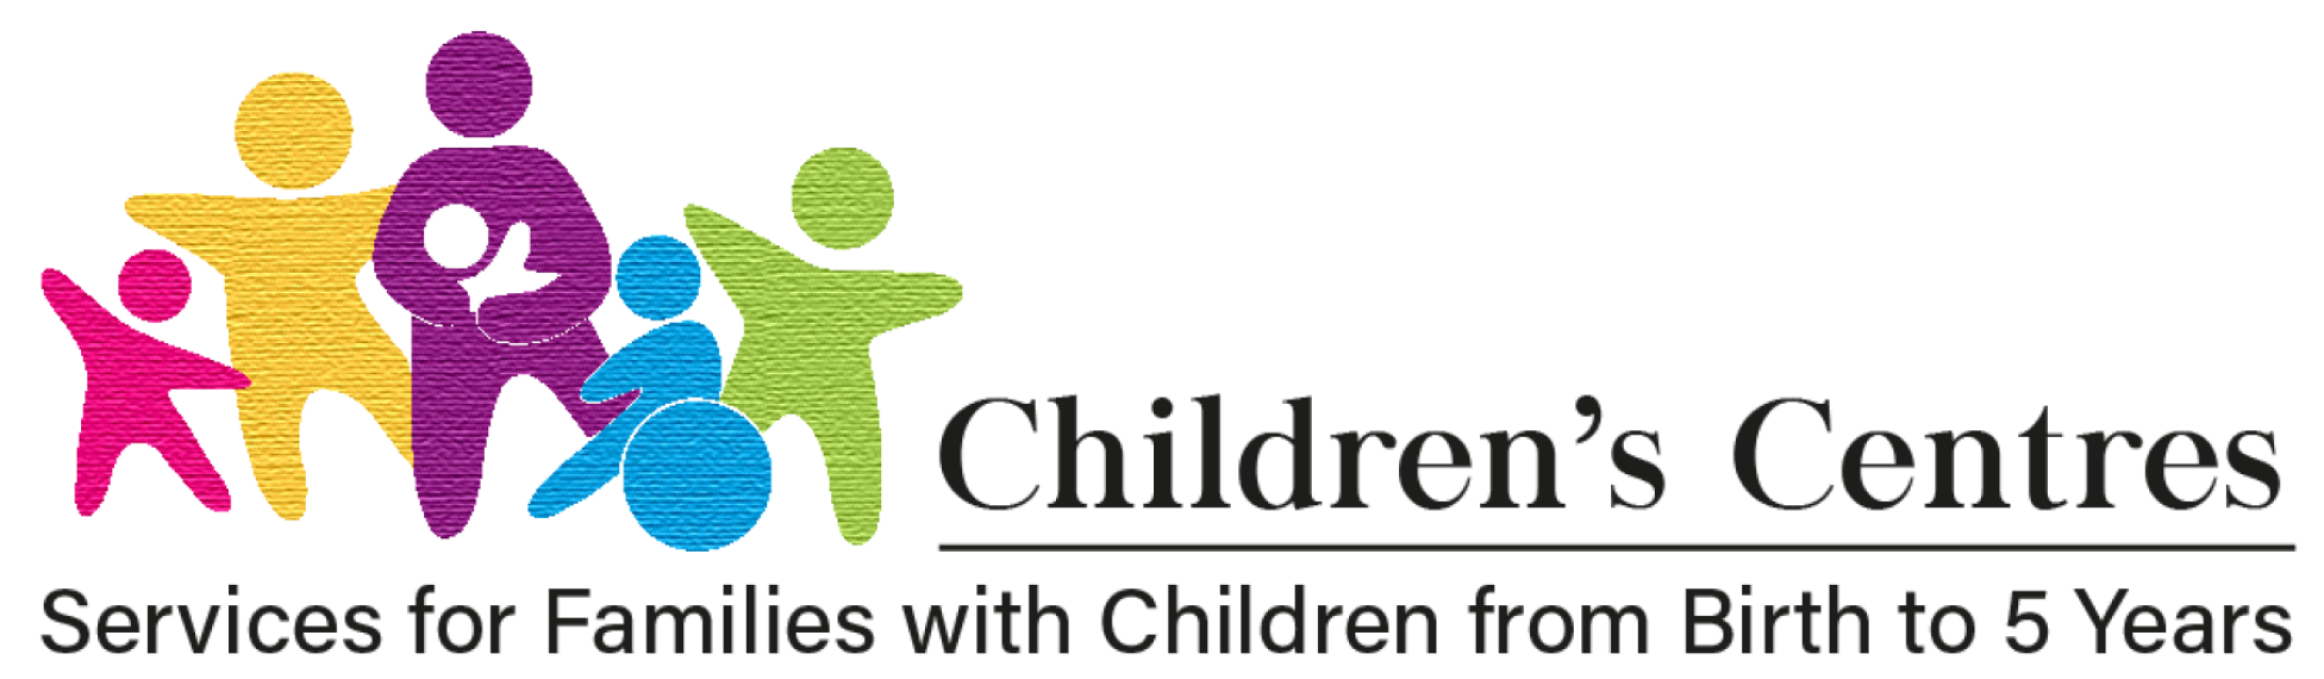 Children's Centres, services for families with children from birth to 5 years (Logo)